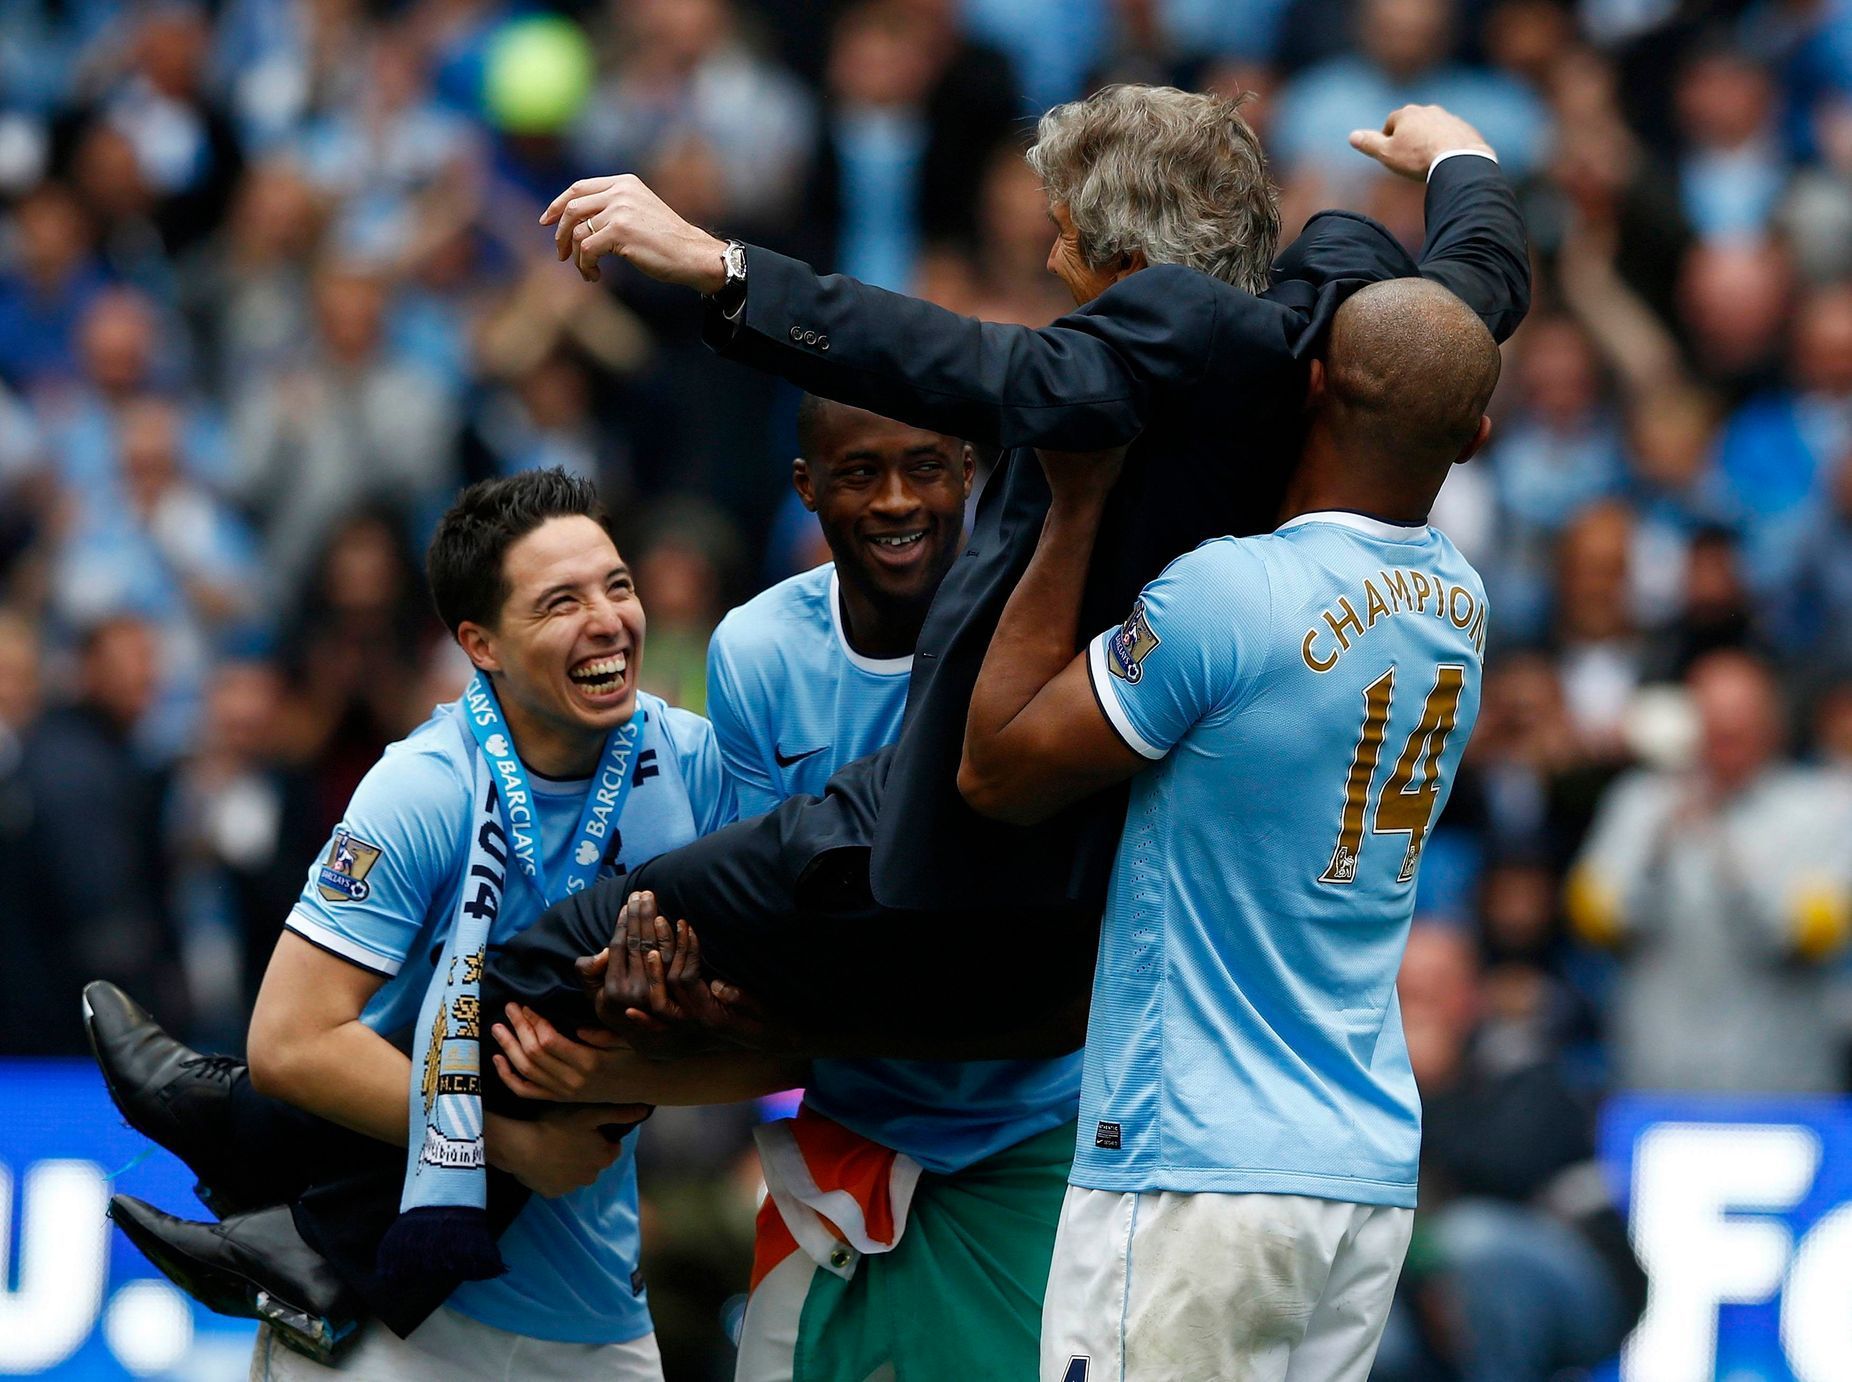 Manchester City's manager Manuel Pellegrini is lifted by his players as they celebrate winning the English Premier League trophy following their soccer match against West Ham United